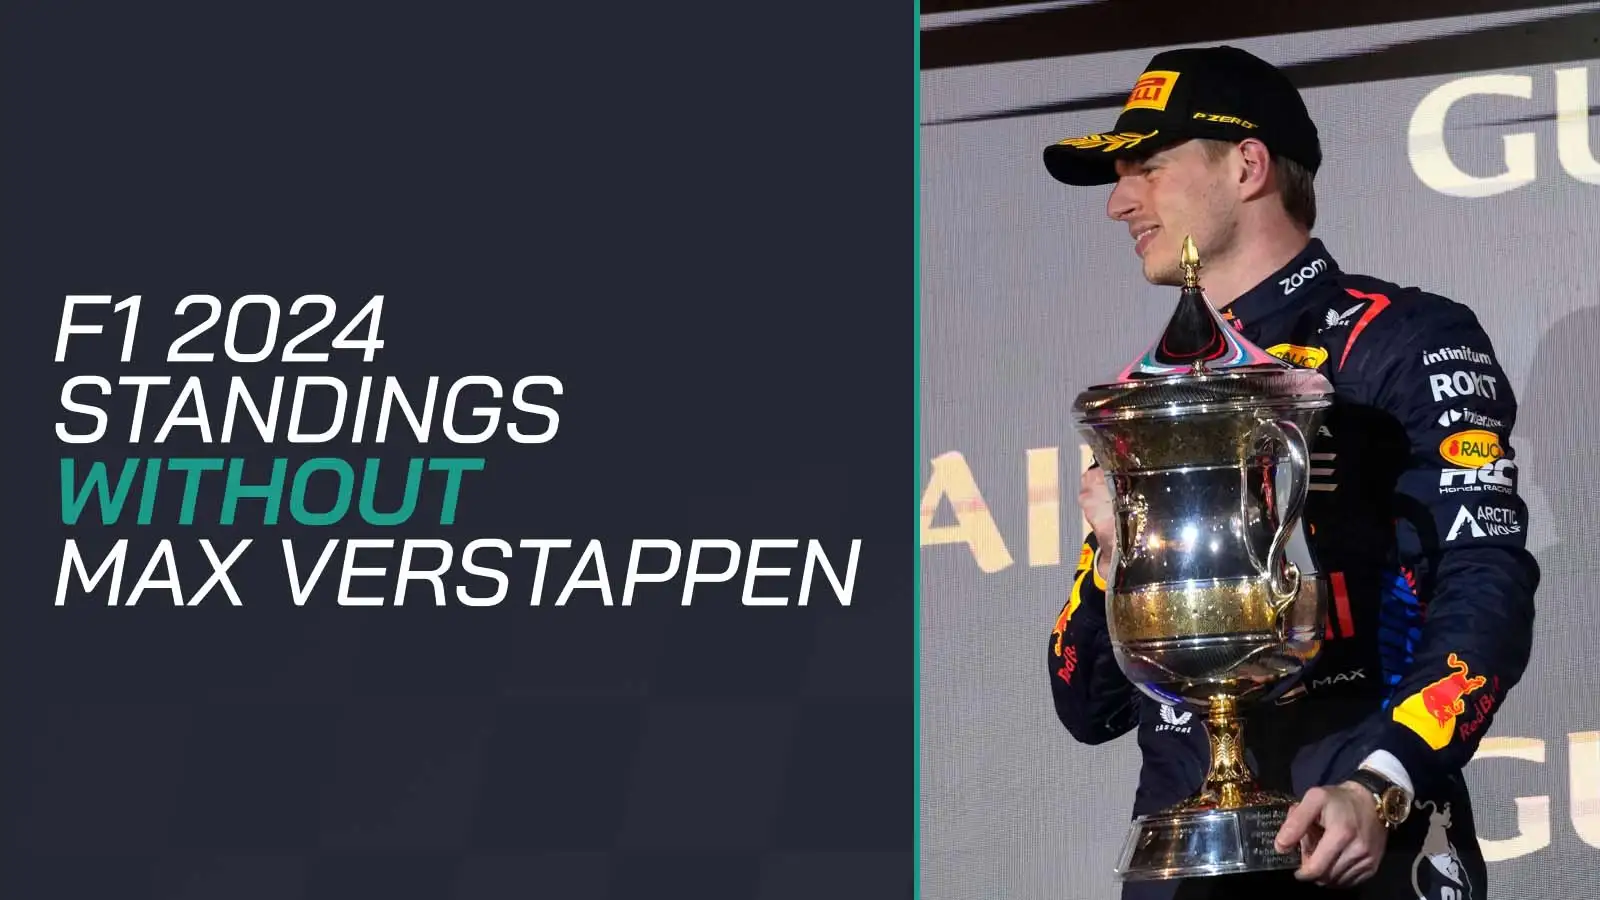 The F1 2024 Drivers’ Championship standings without Max Verstappen